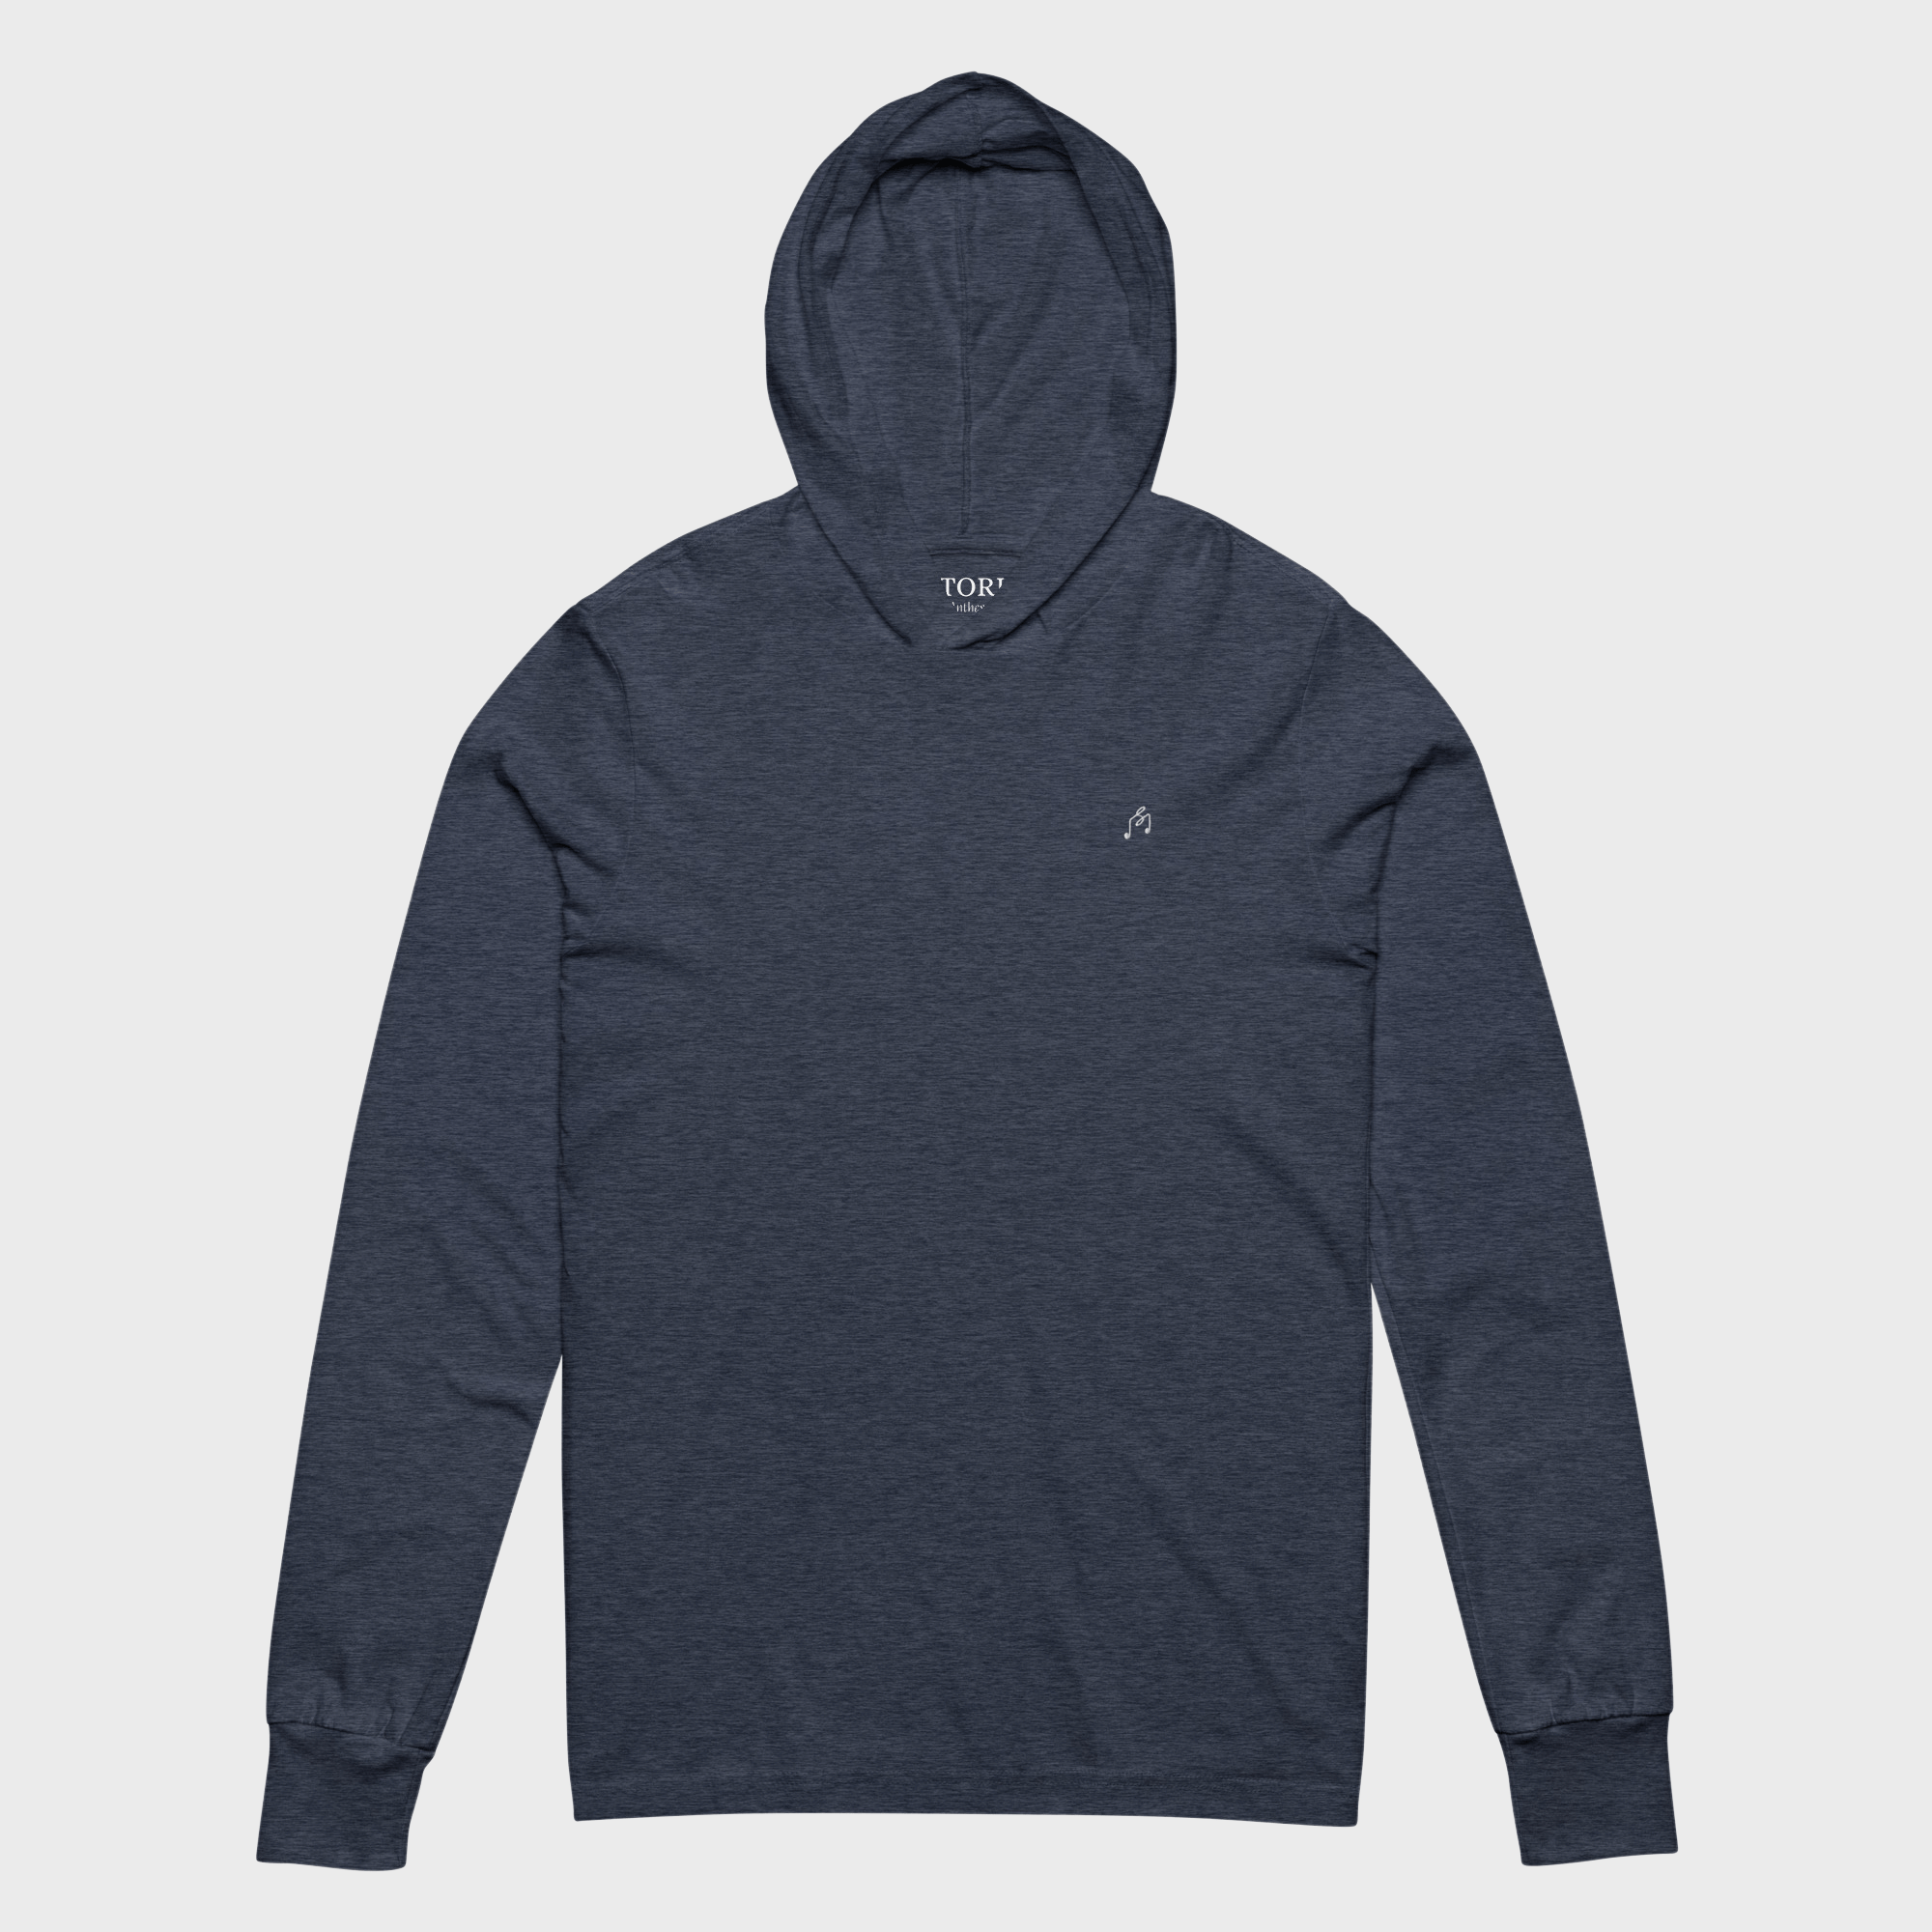 Heather Navy hooded long sleeve #color_heather navy